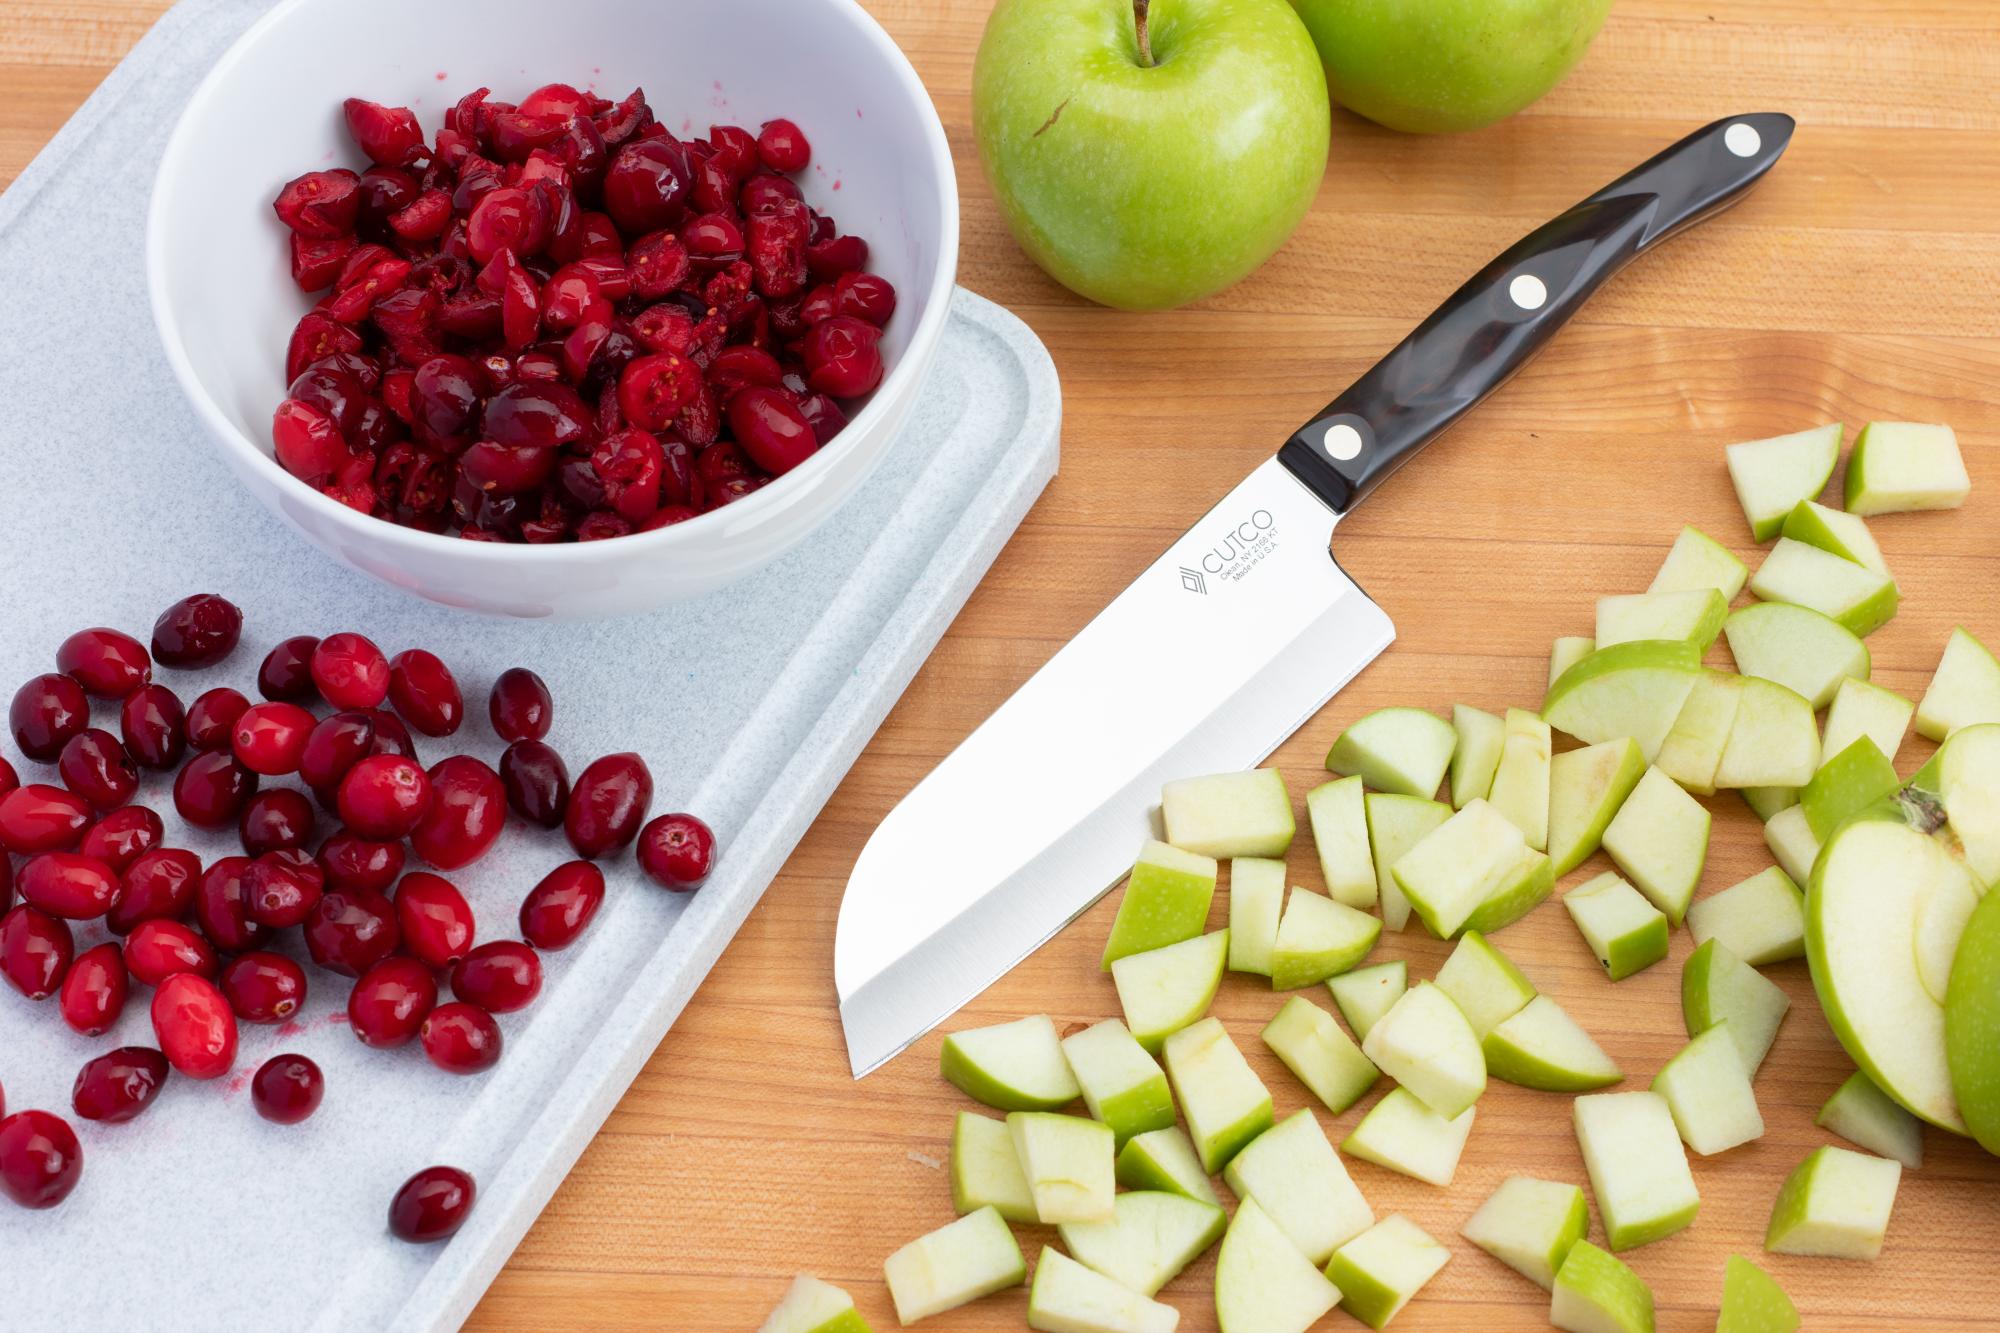 Slicing the apples with a Petite Santoku